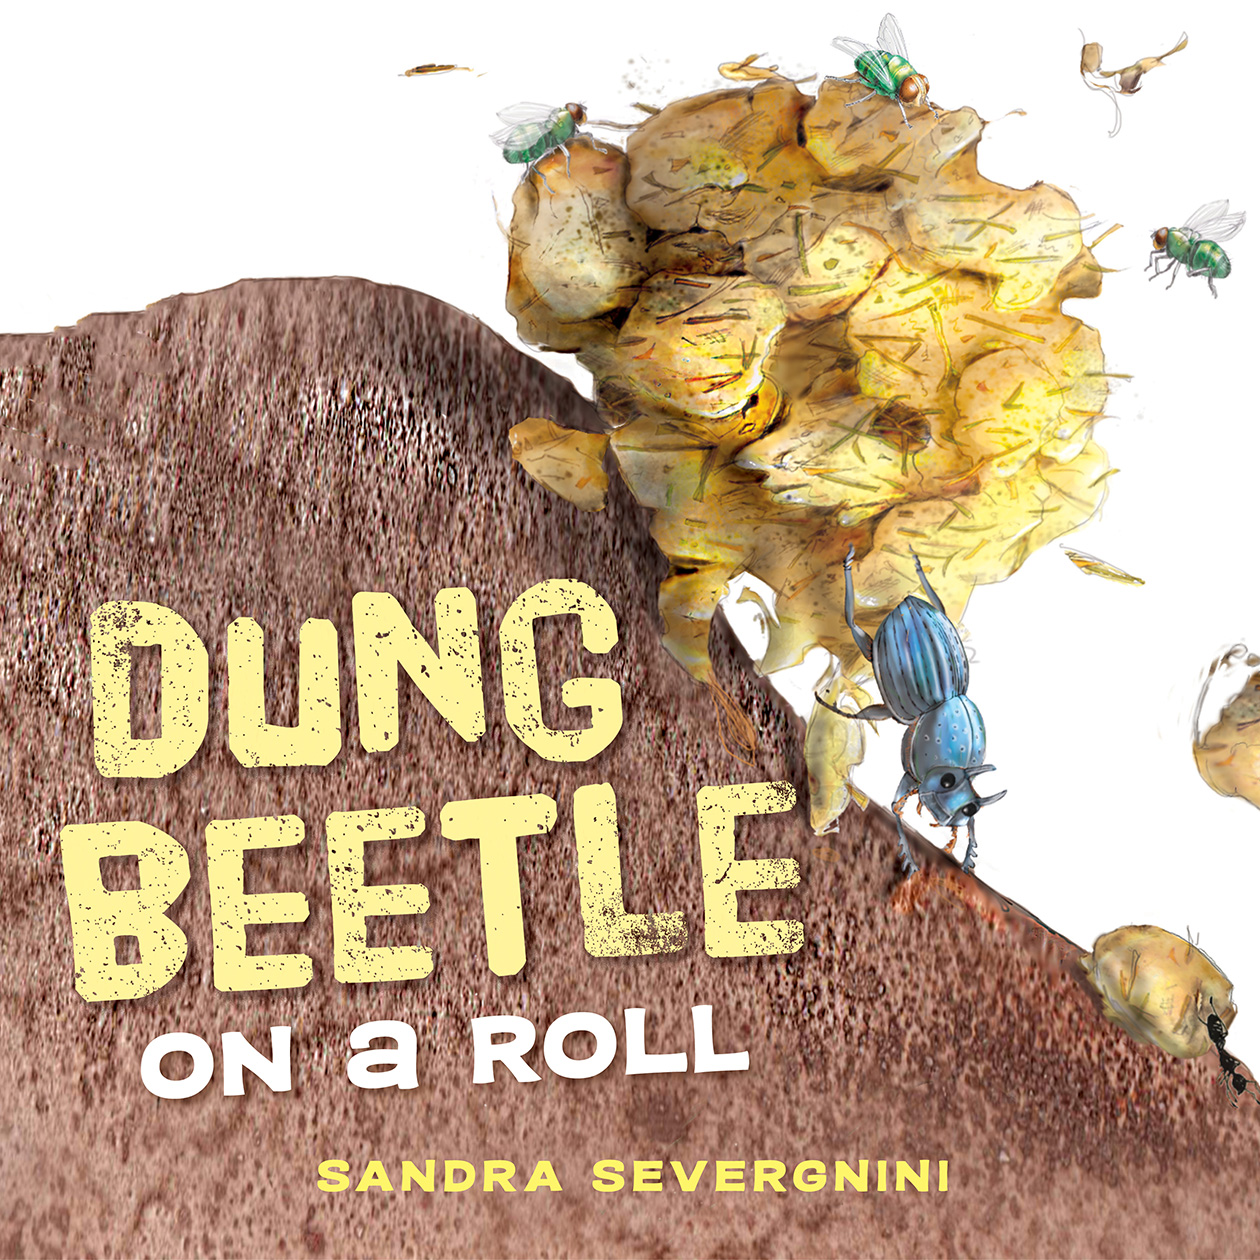 Cover of 'Dung Beetle on a Roll' with an illustration of a dung beetle pushing a fly-covered ball of dung up a dirt mound.